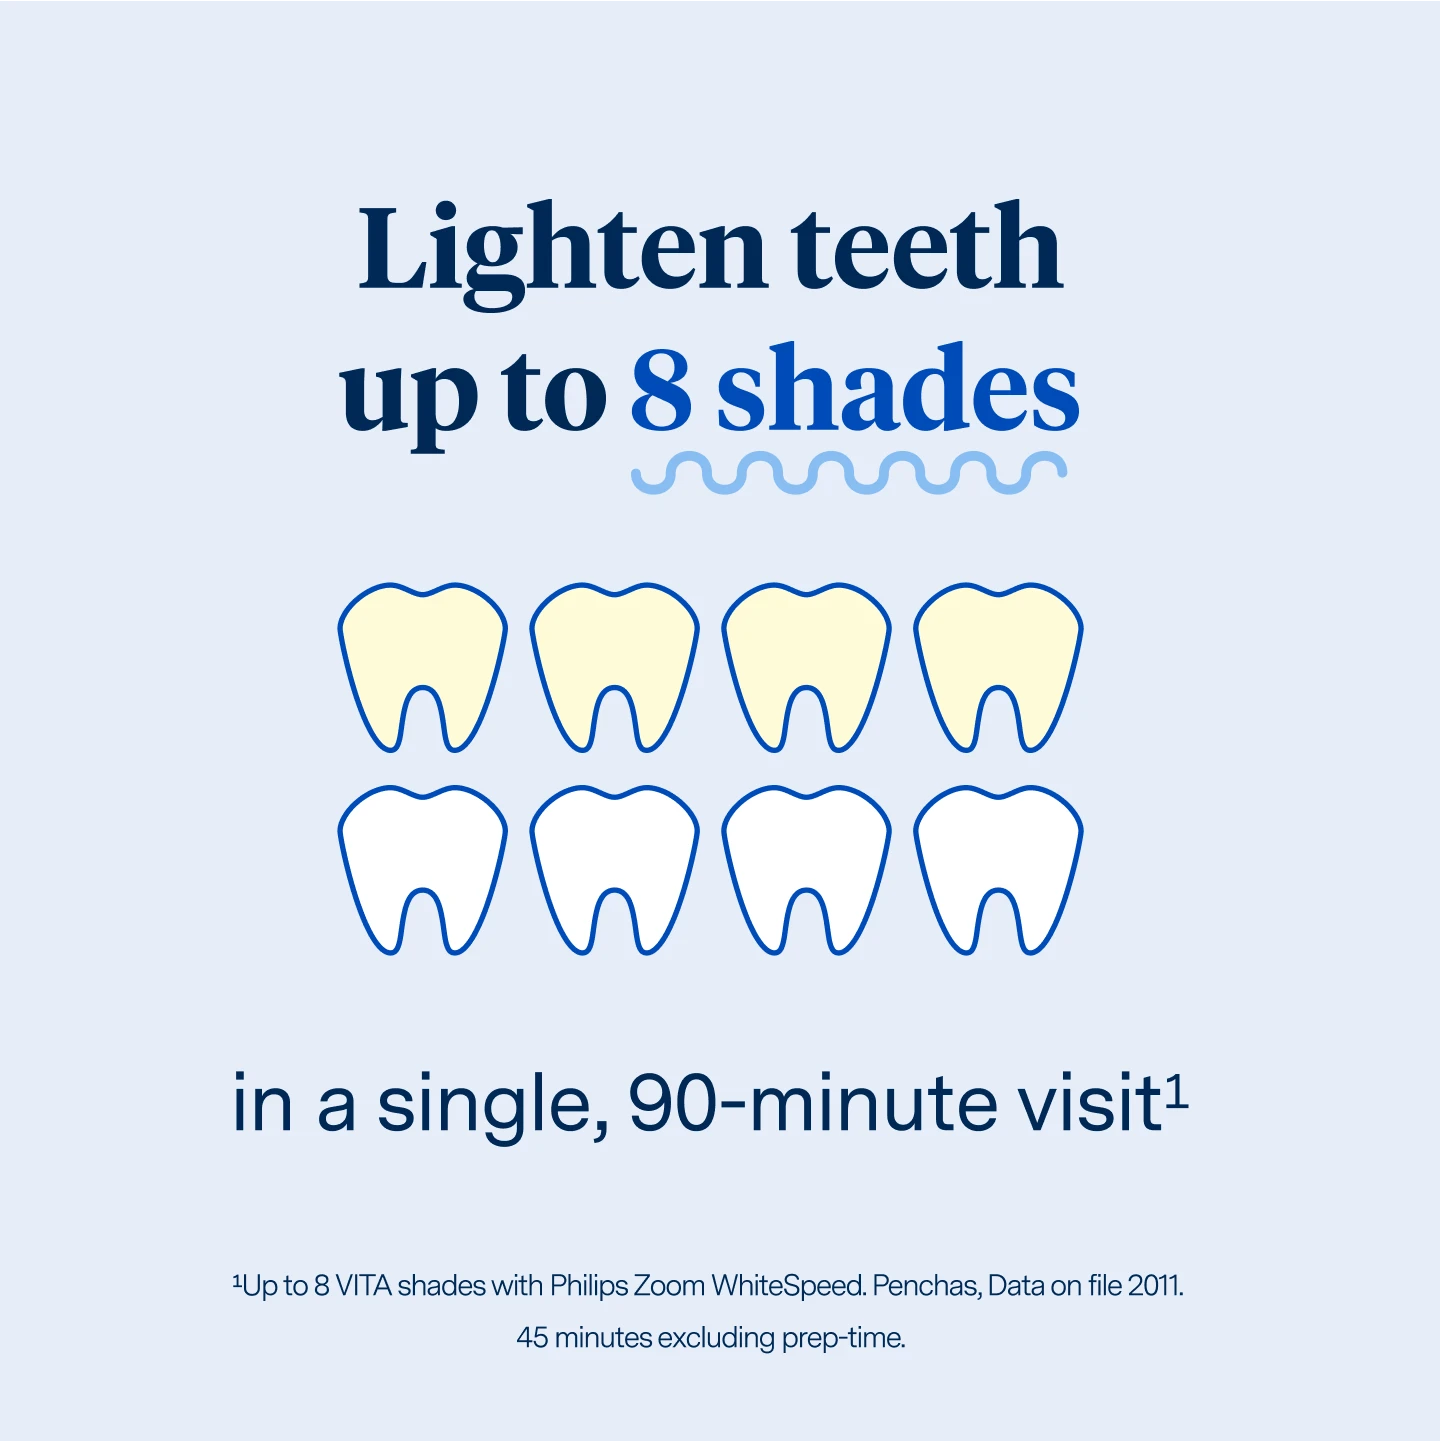 Lighten teeth up to 8 shades in a single, 90 minute visit. 